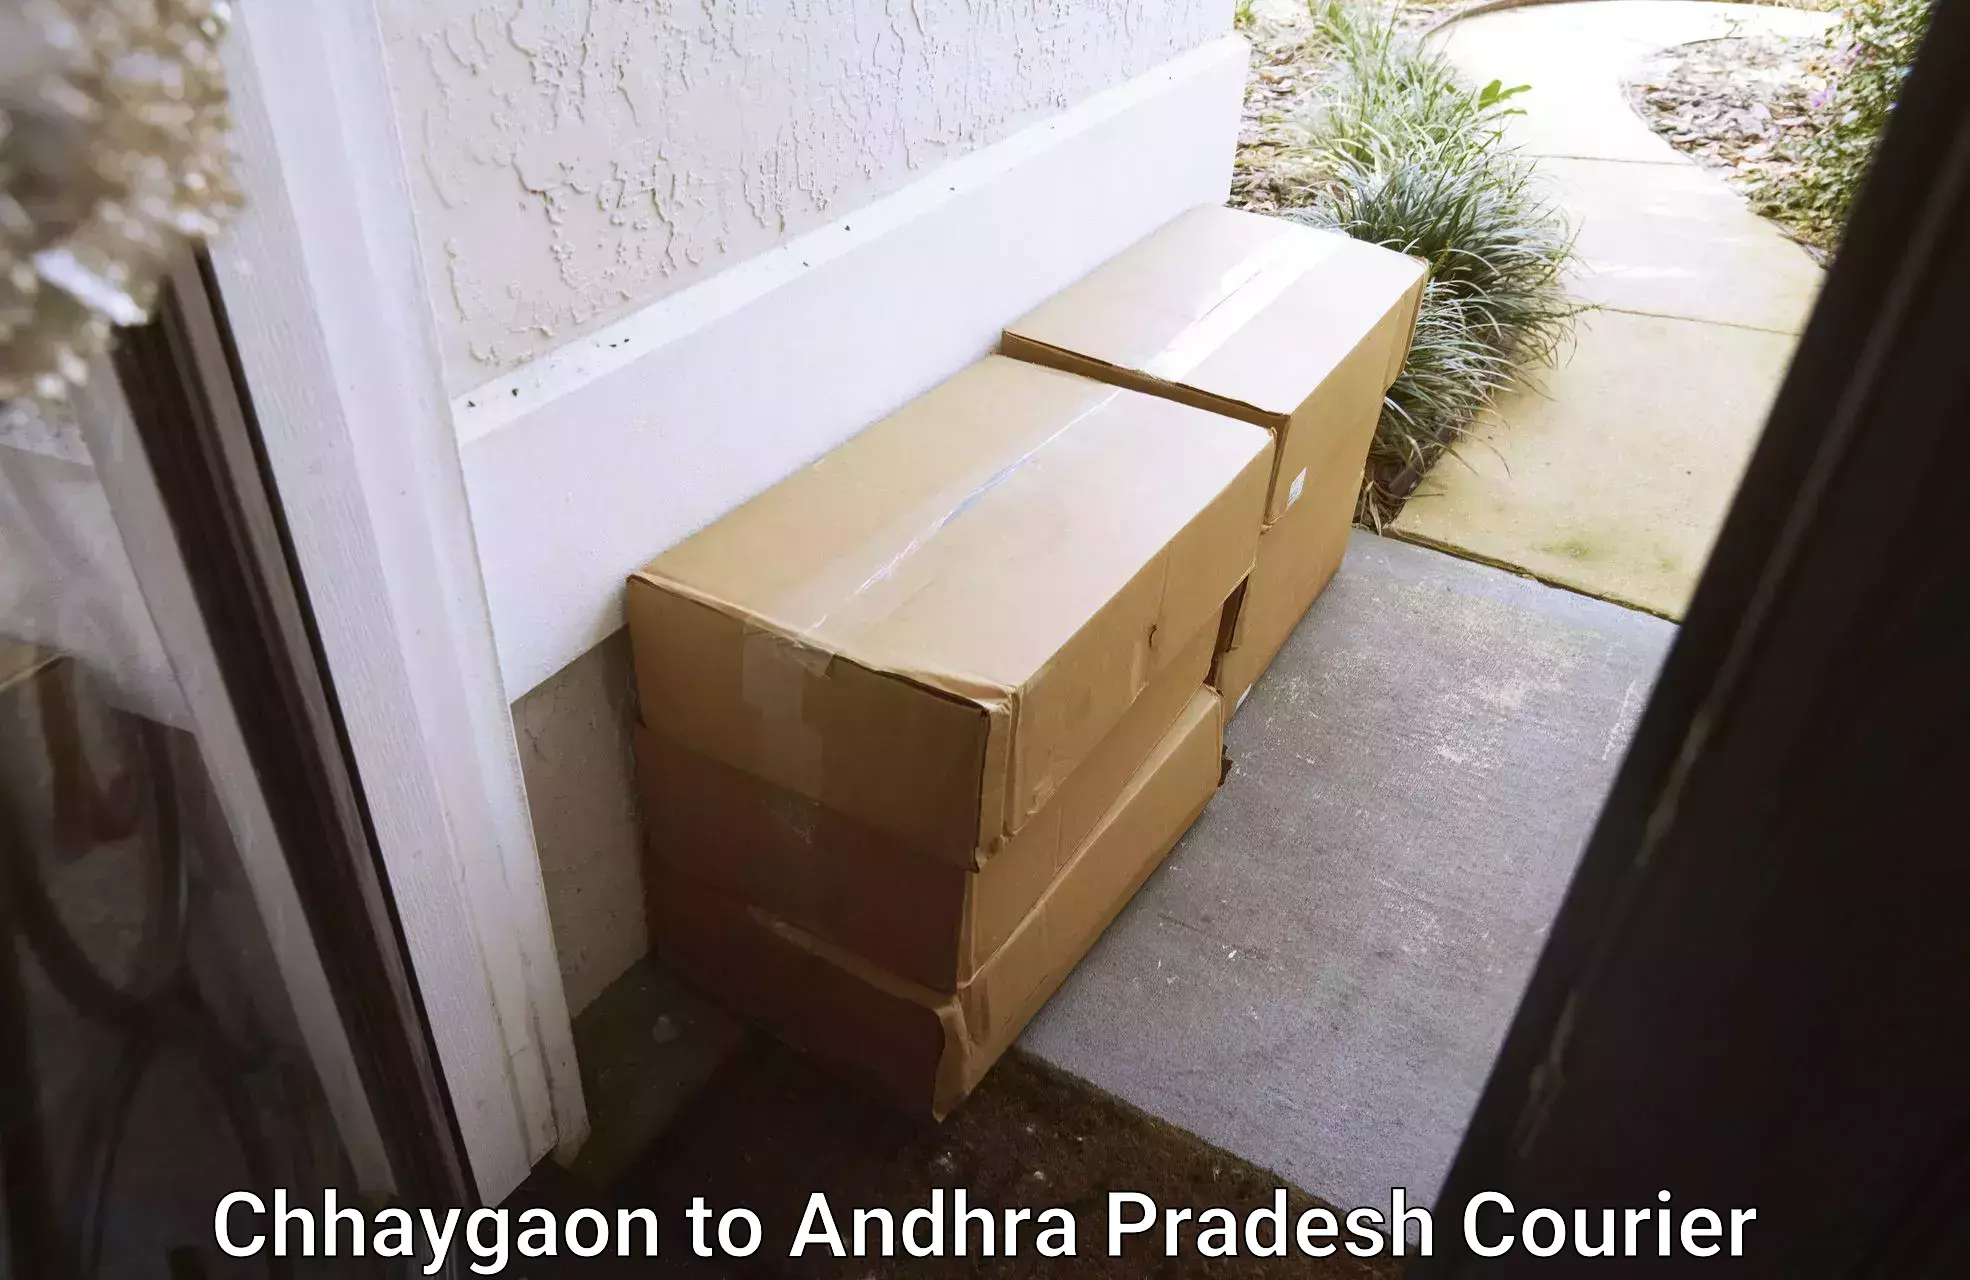 Custom courier packaging Chhaygaon to Andhra Pradesh